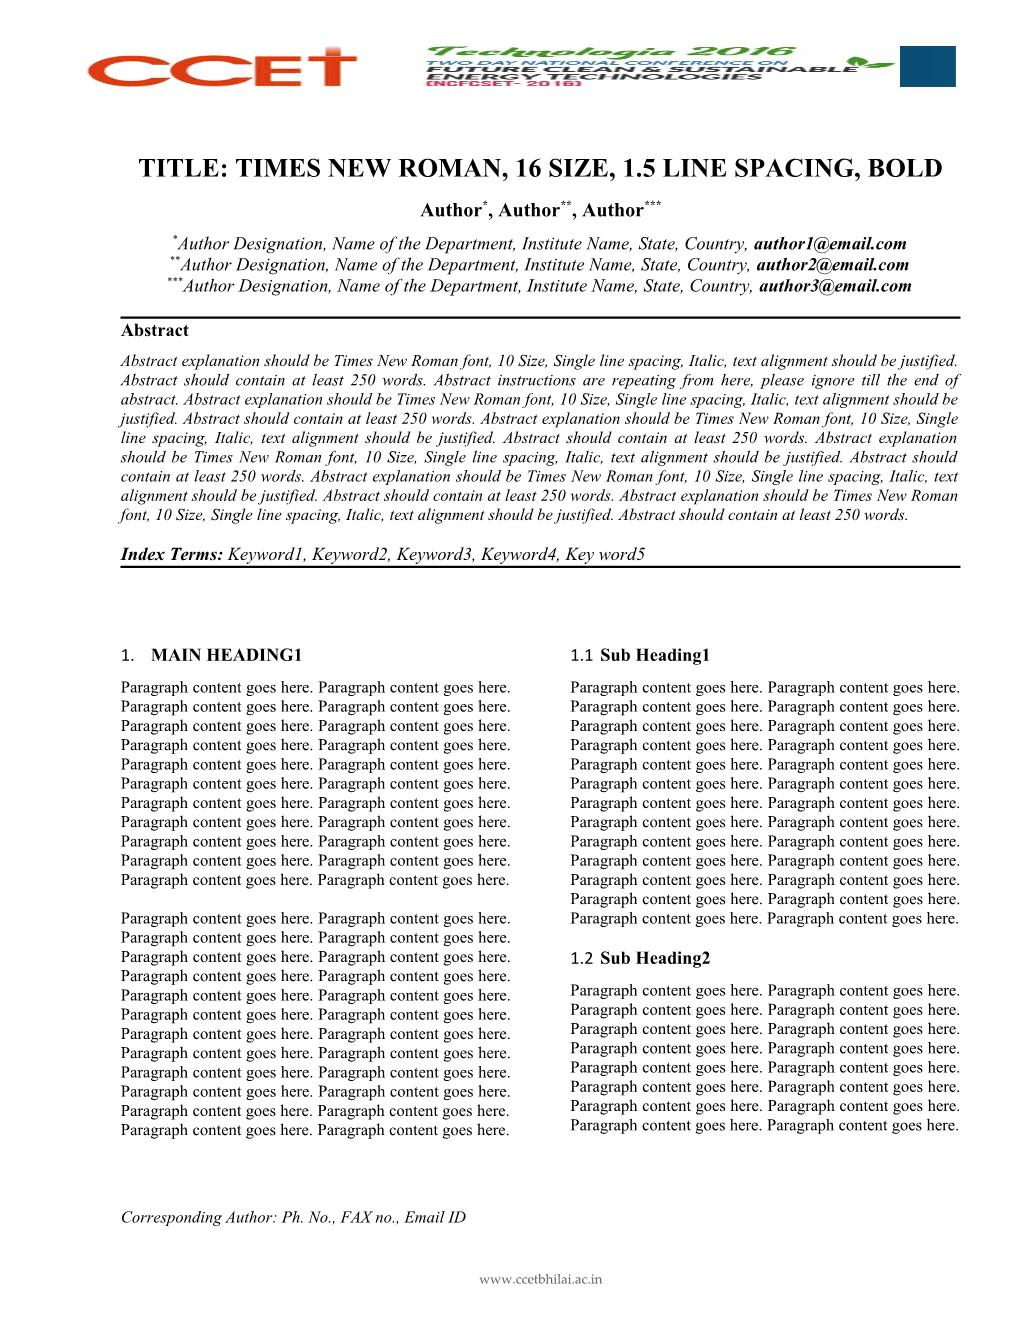 Title: Times New Roman, 16 Size, 1.5 Line Spacing, Bold